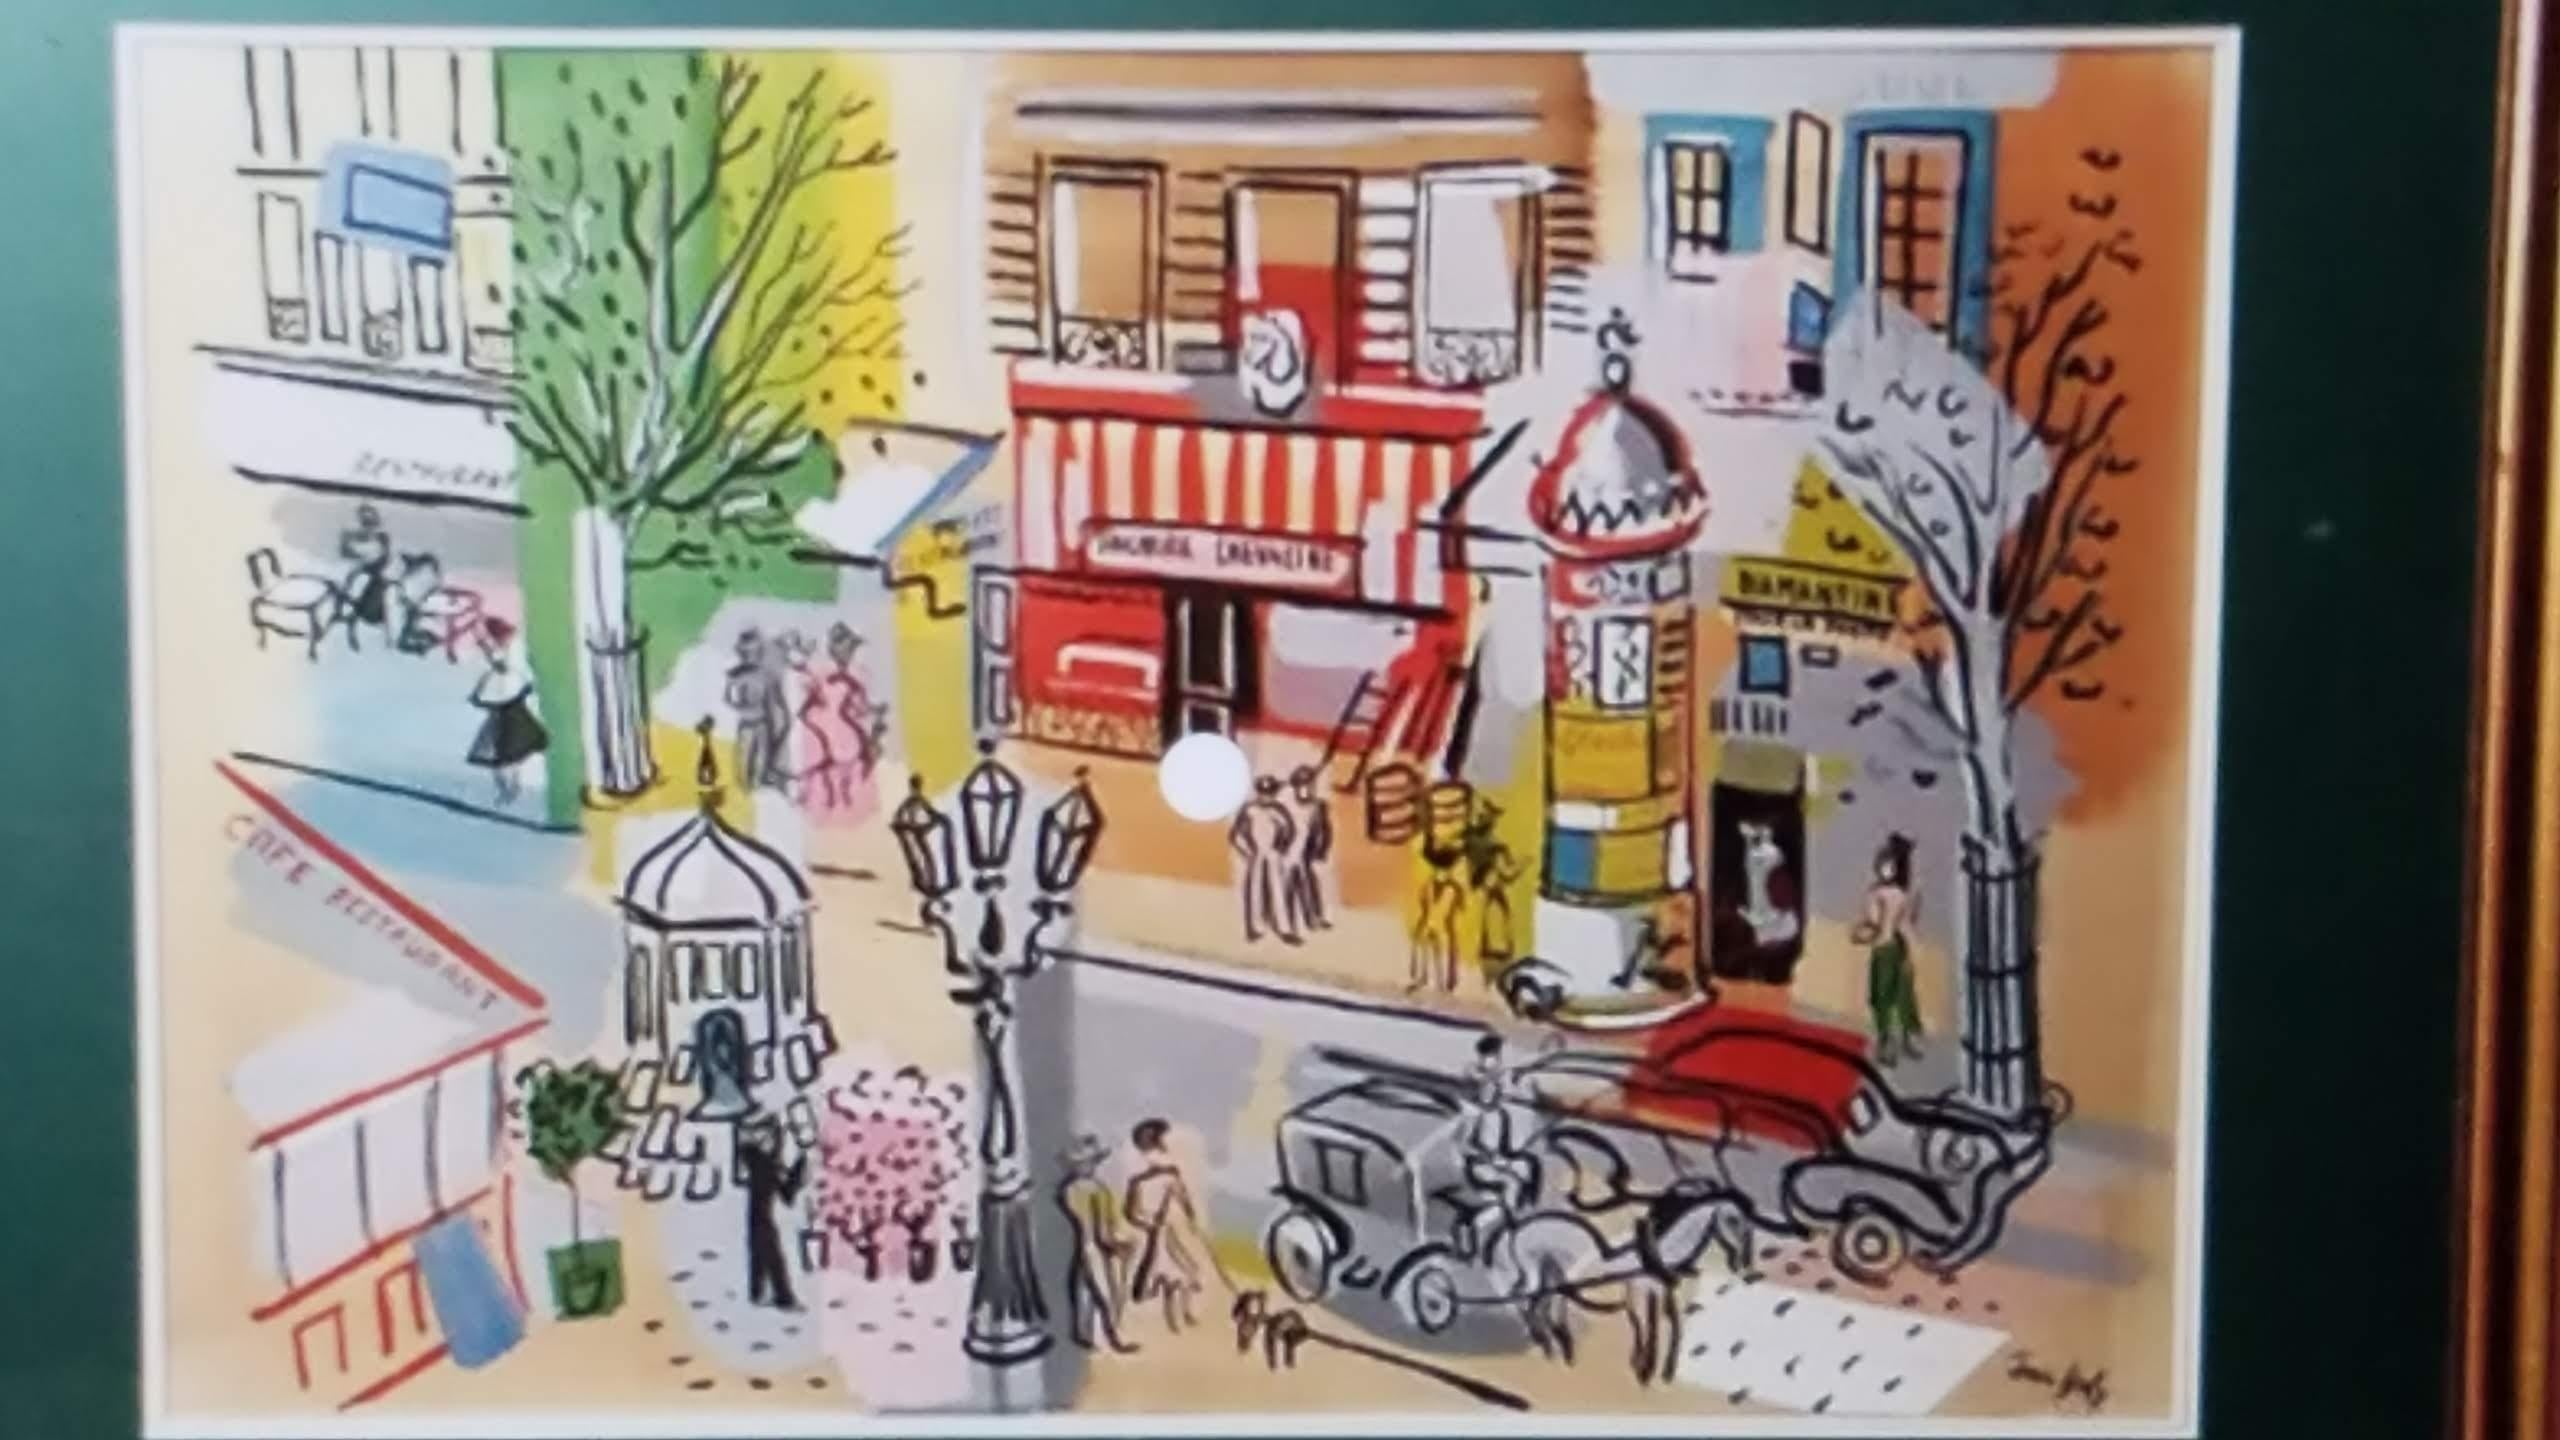 A wonderful mosaic of ceramic and iridescent tile that captures the vitality and color of a neighborhood in Paris with small shops, a cafe, a pharmacie, along a tree lined boulevard based on a Jean Dufy 1950s watercolor of a Parisian street scene